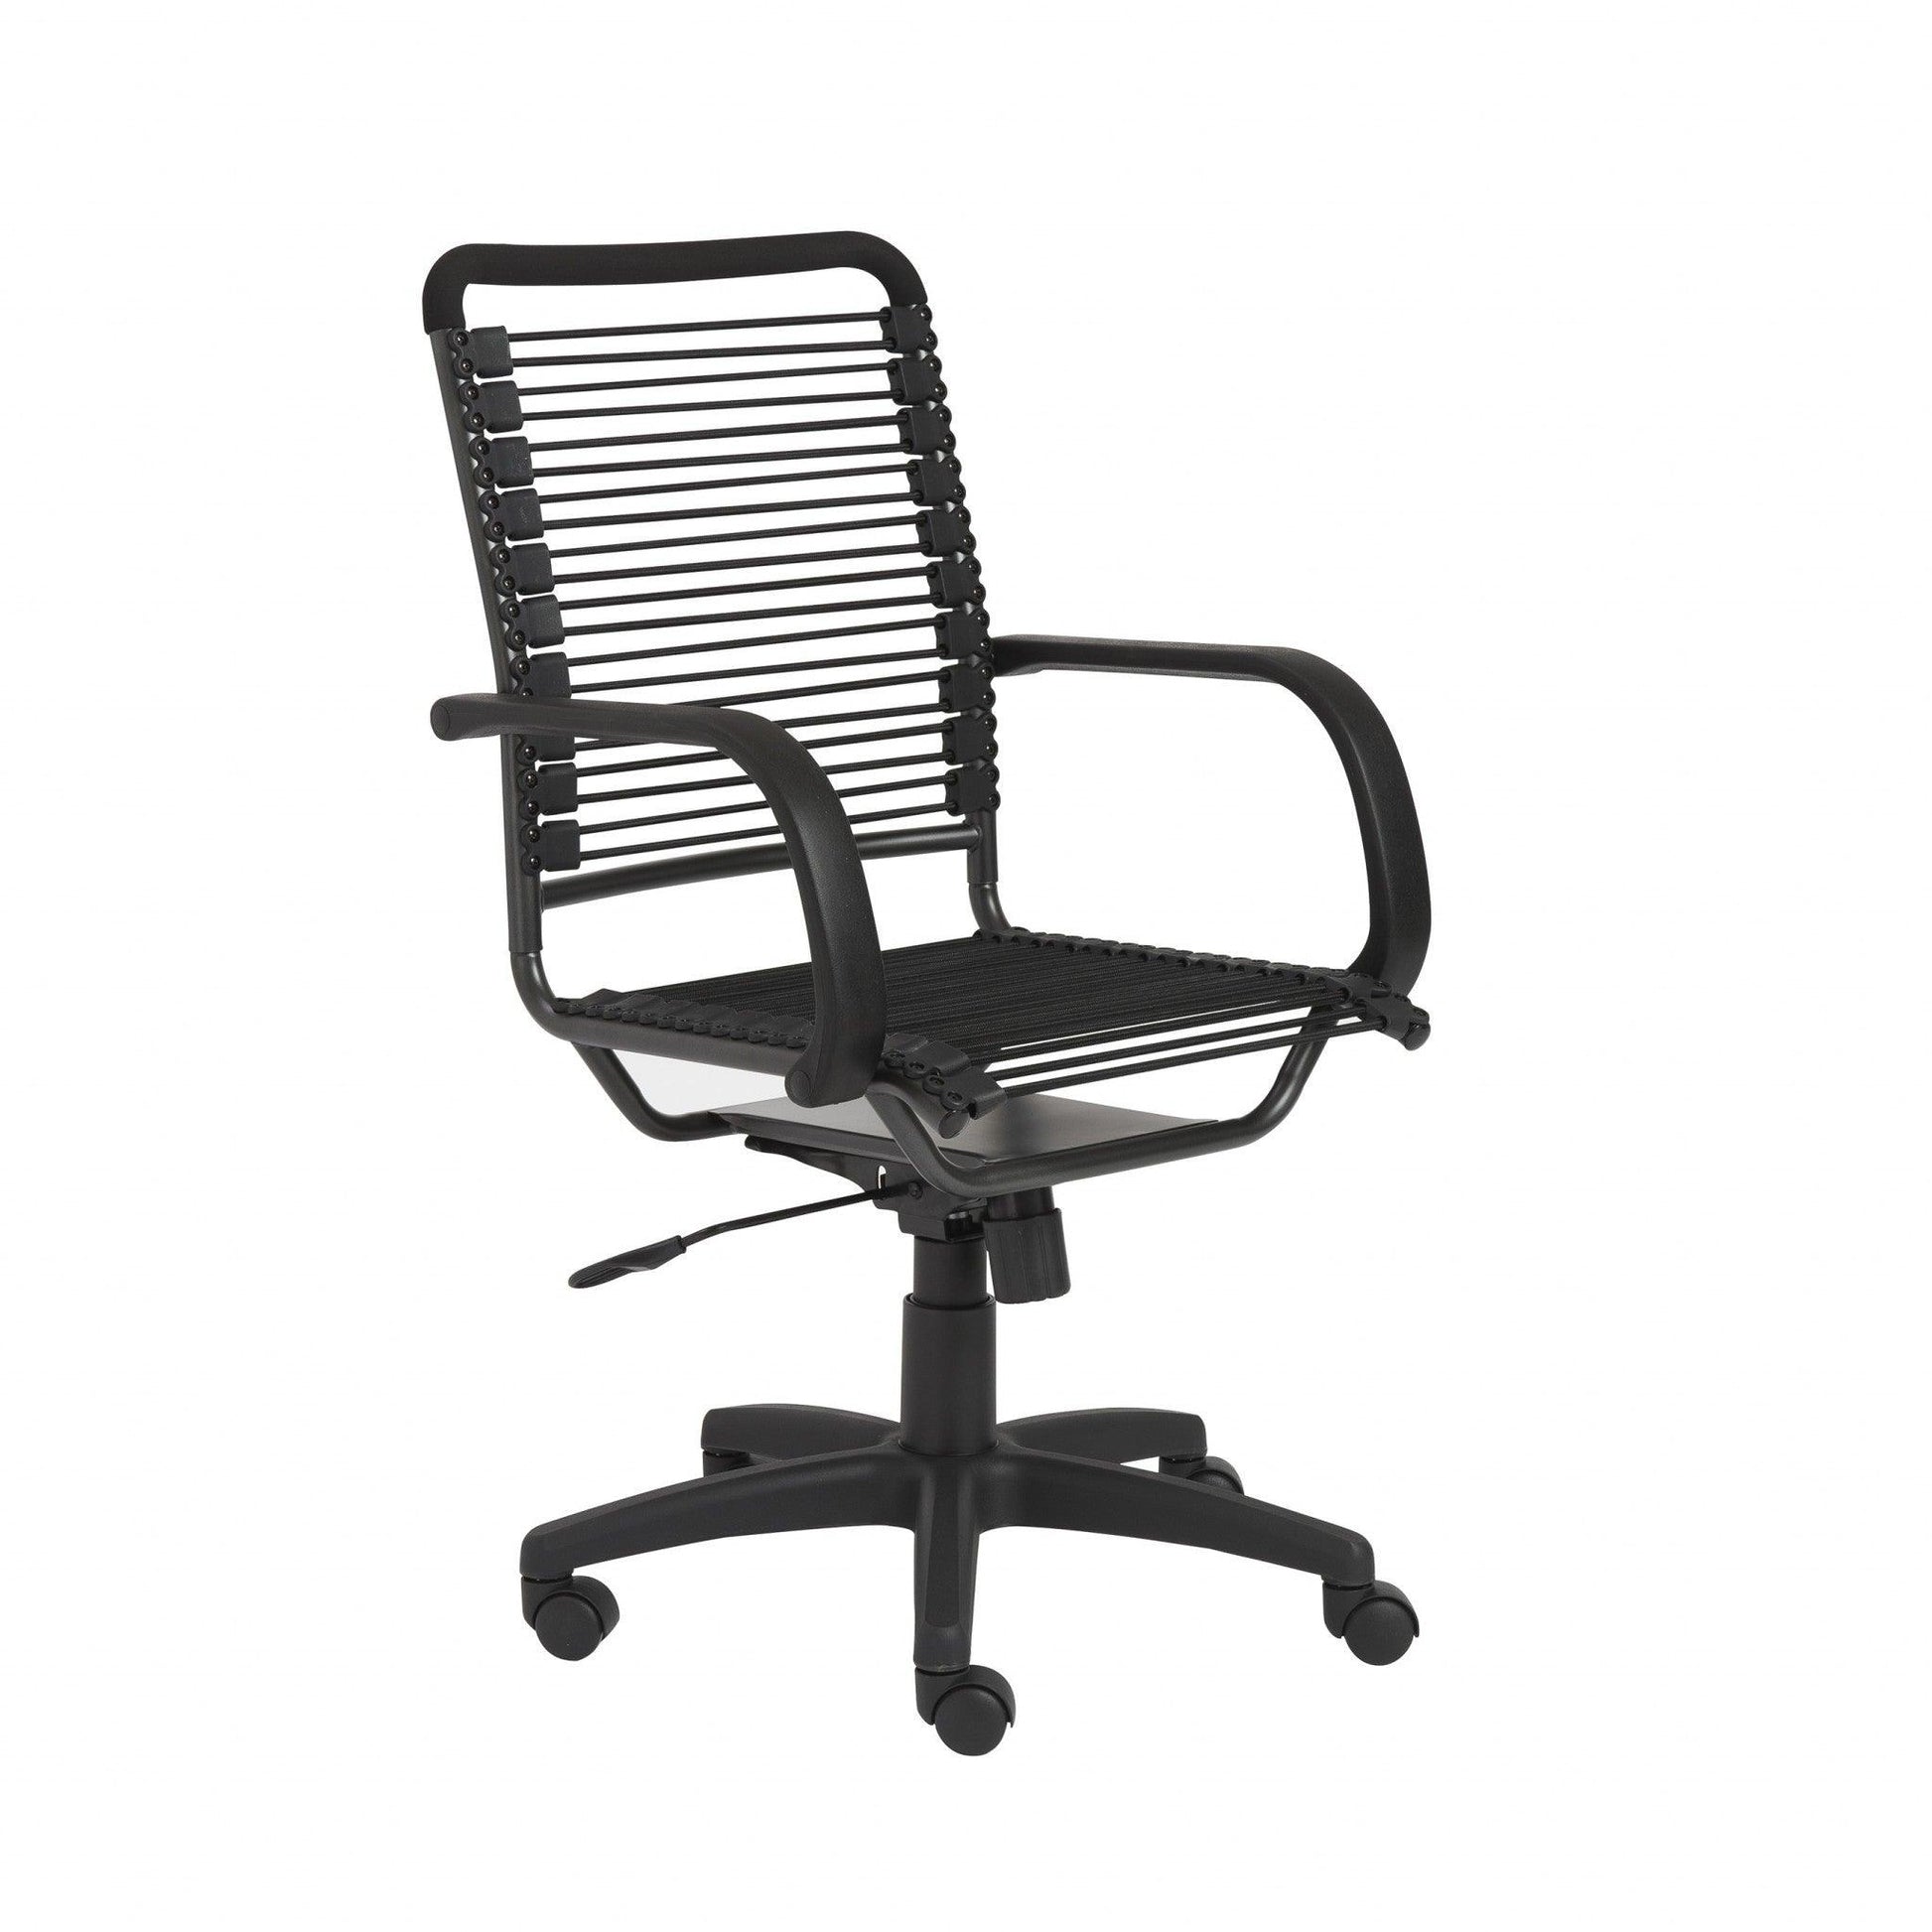 43" All Black Round Bungee Cord High Back Office Chair - AFS